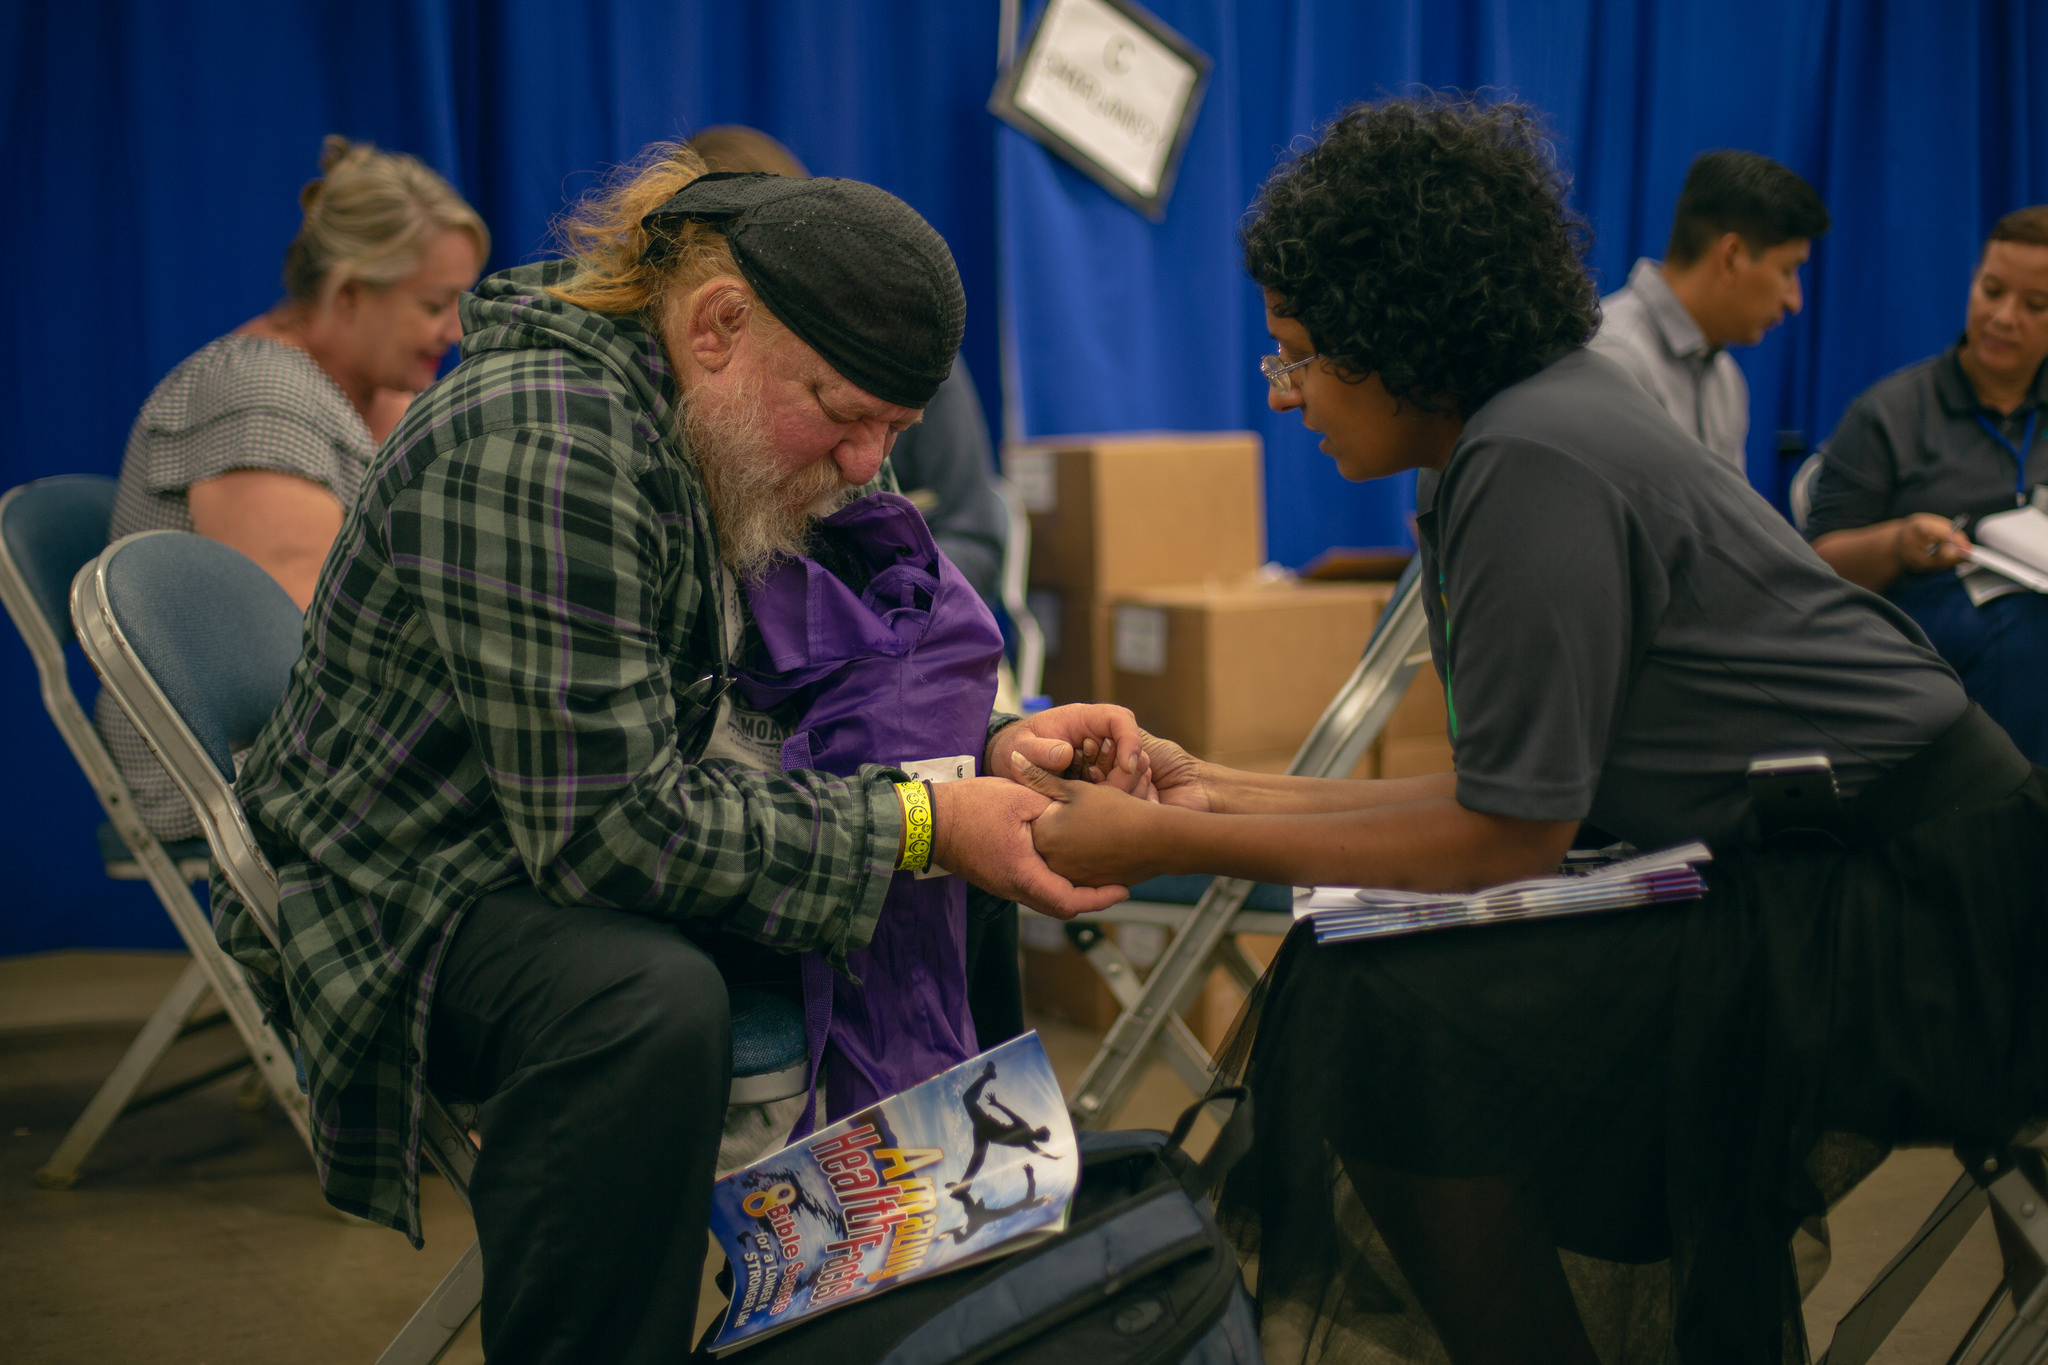 A patient and volunteer pray together during the Sept. 19-21, 2018, mega clinic in Forth Worth, Texas. Photo by Pieter Damsteegt